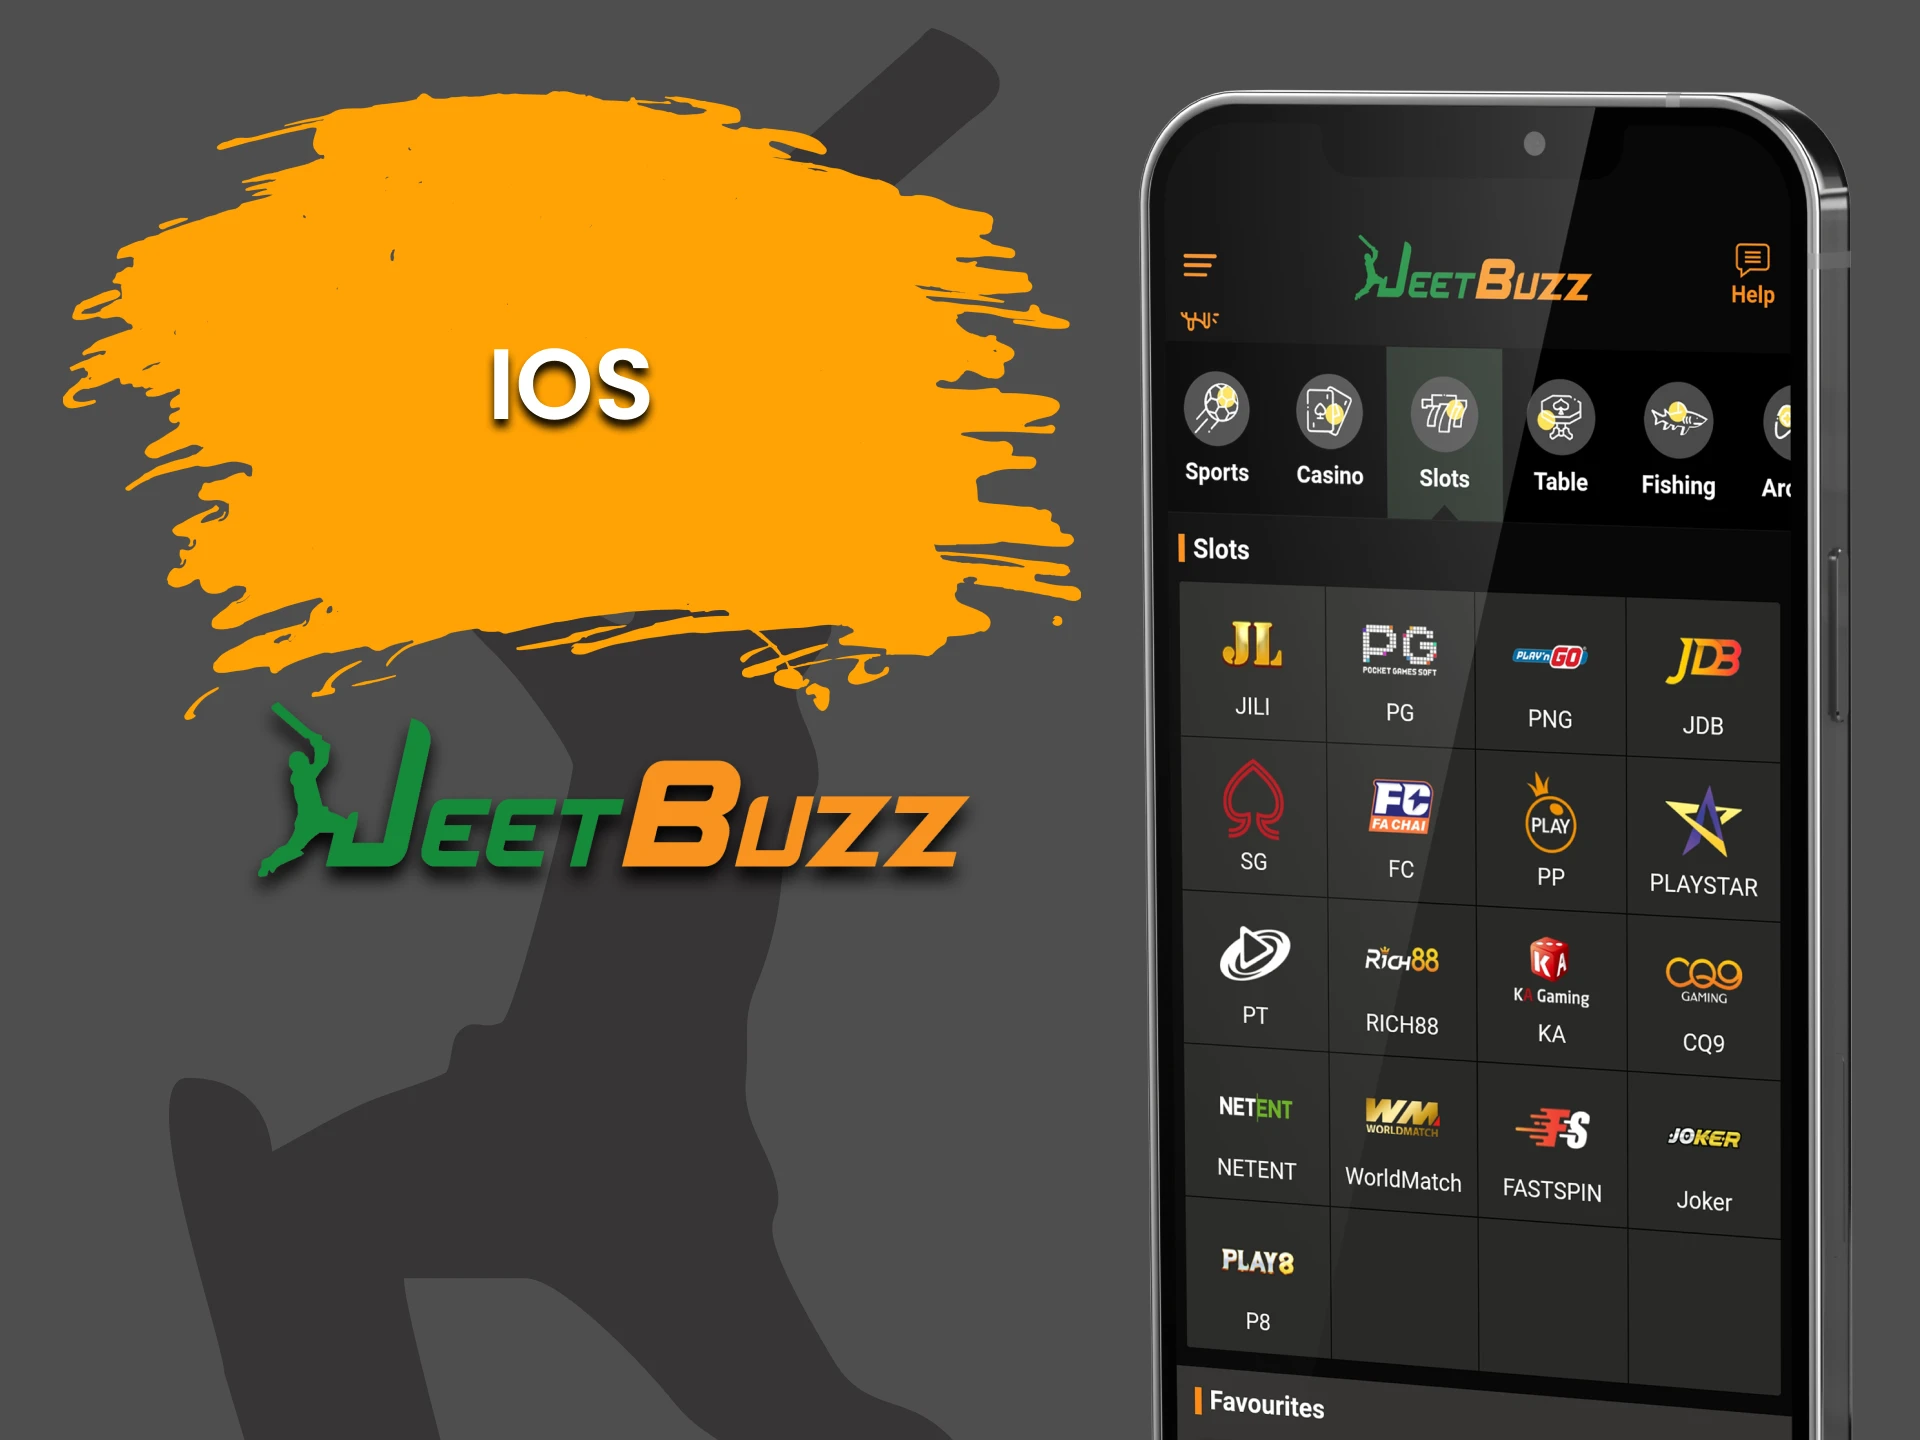 Download the JeetBuzz iOS app to play Slots.